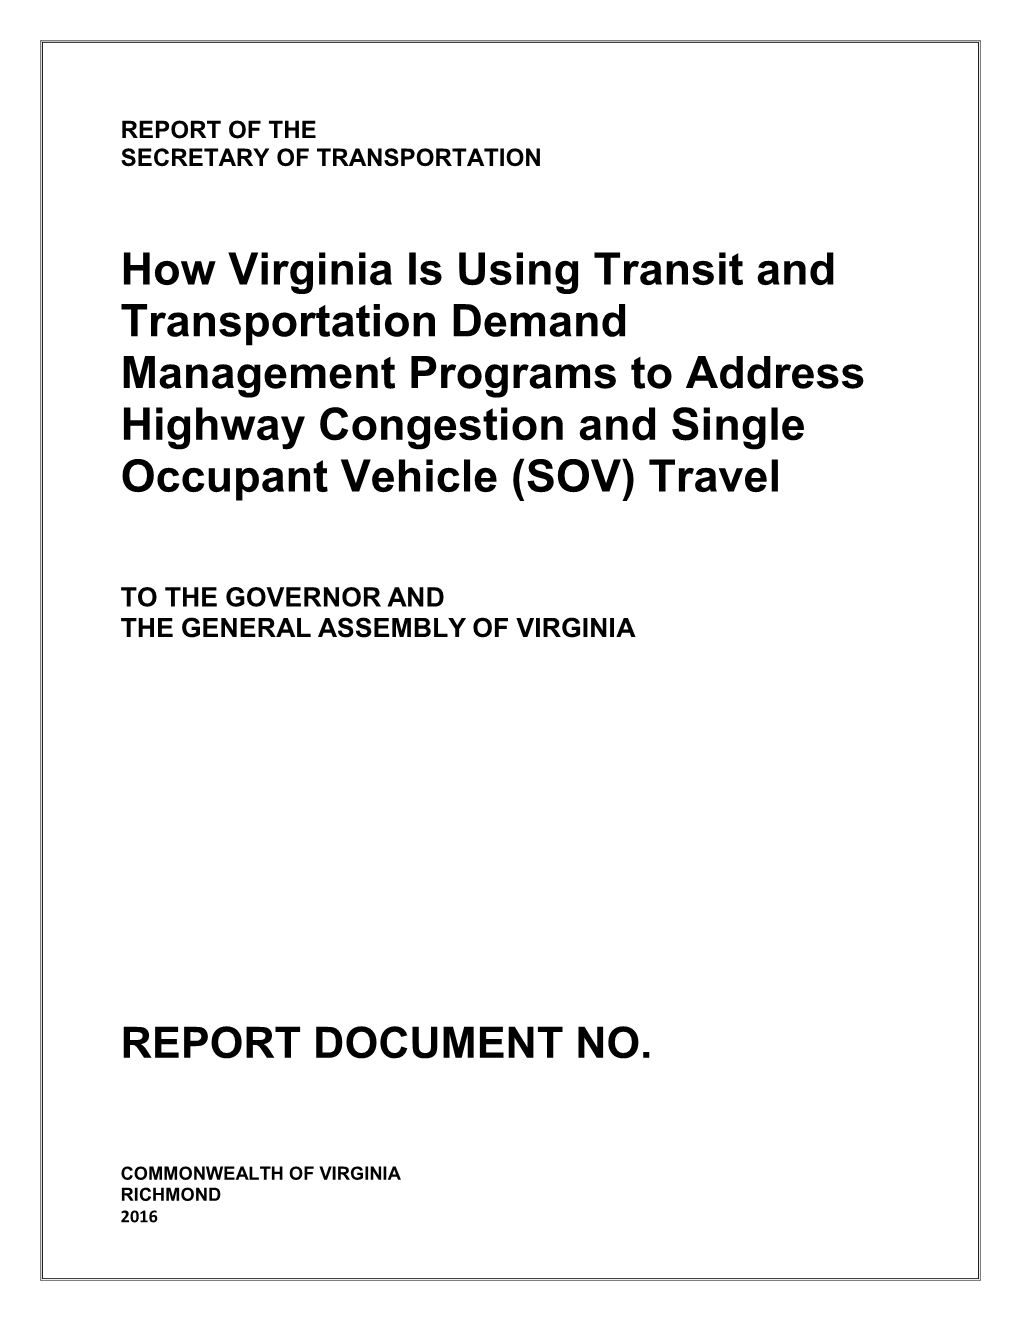 Final Transit and TDM Report to the General Assembly